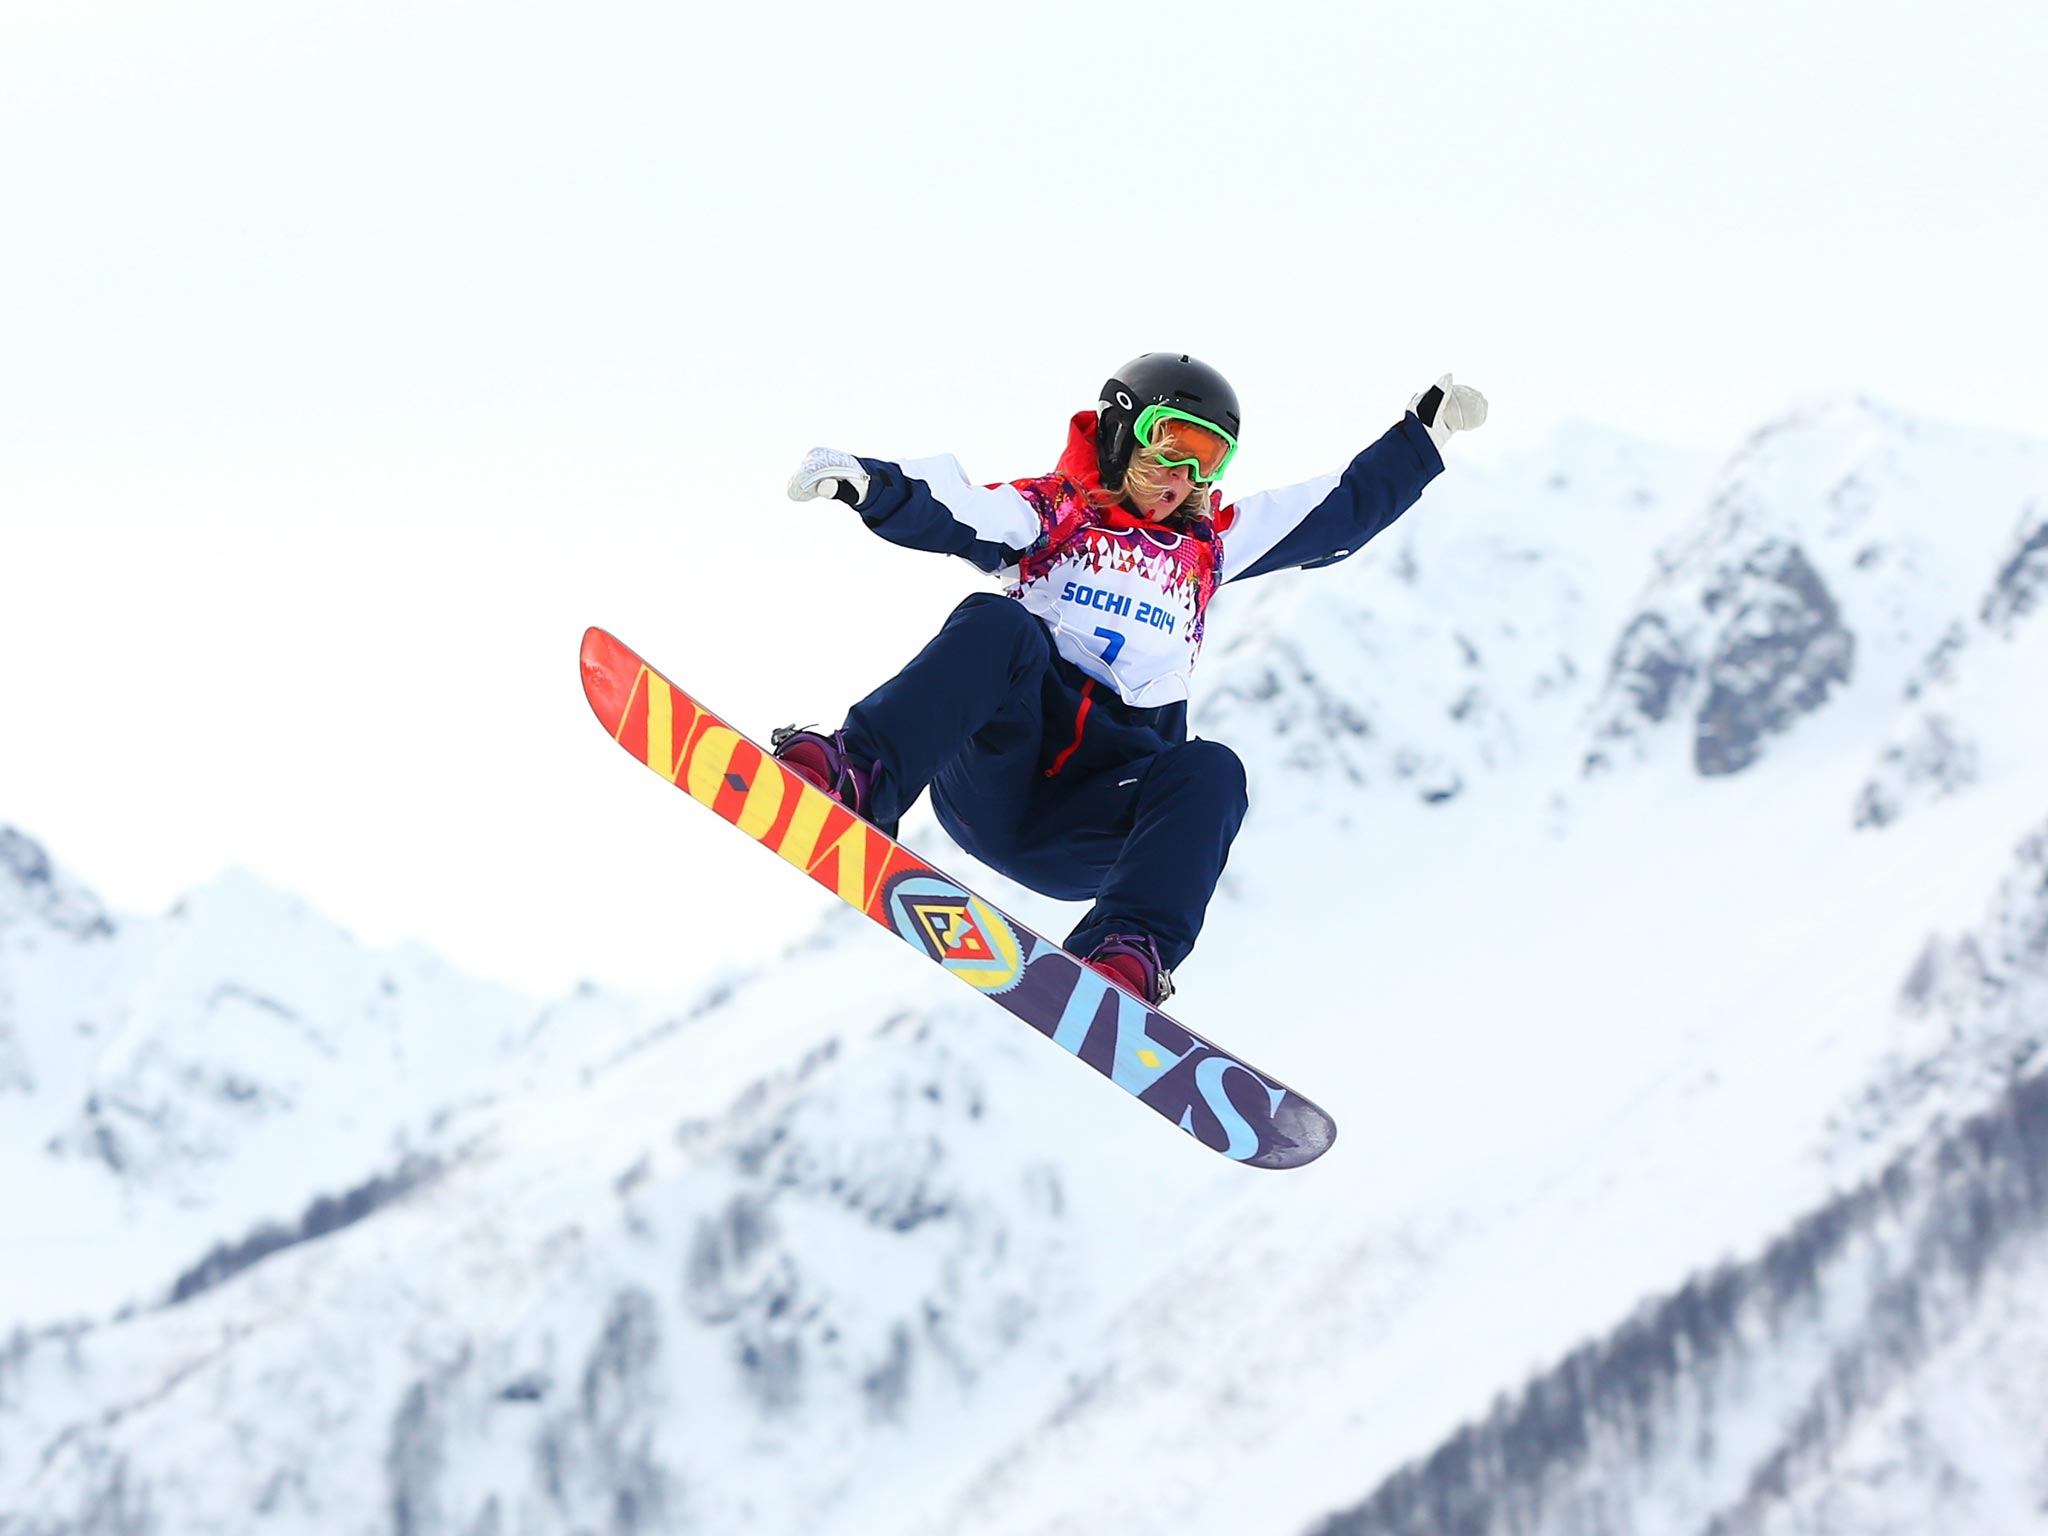 Jenny Jones of Great Britain competes in the Women's Snowboard Slopestyle Semi finals